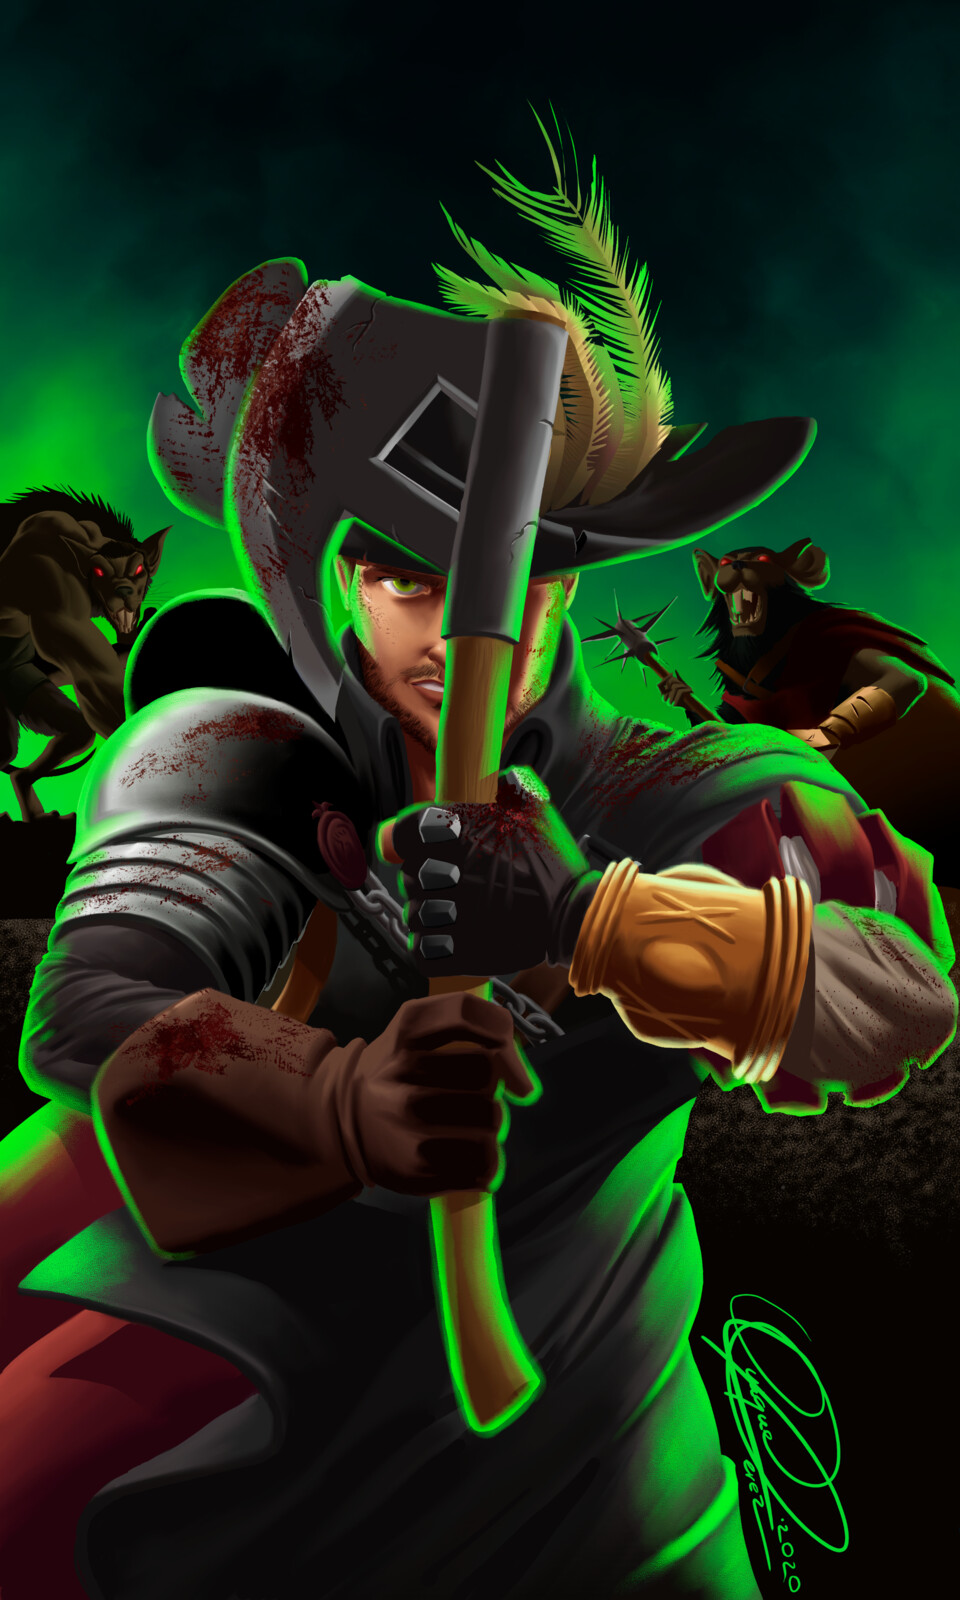 There's been a change in the tides... now Vermintide is here! (February 2020)